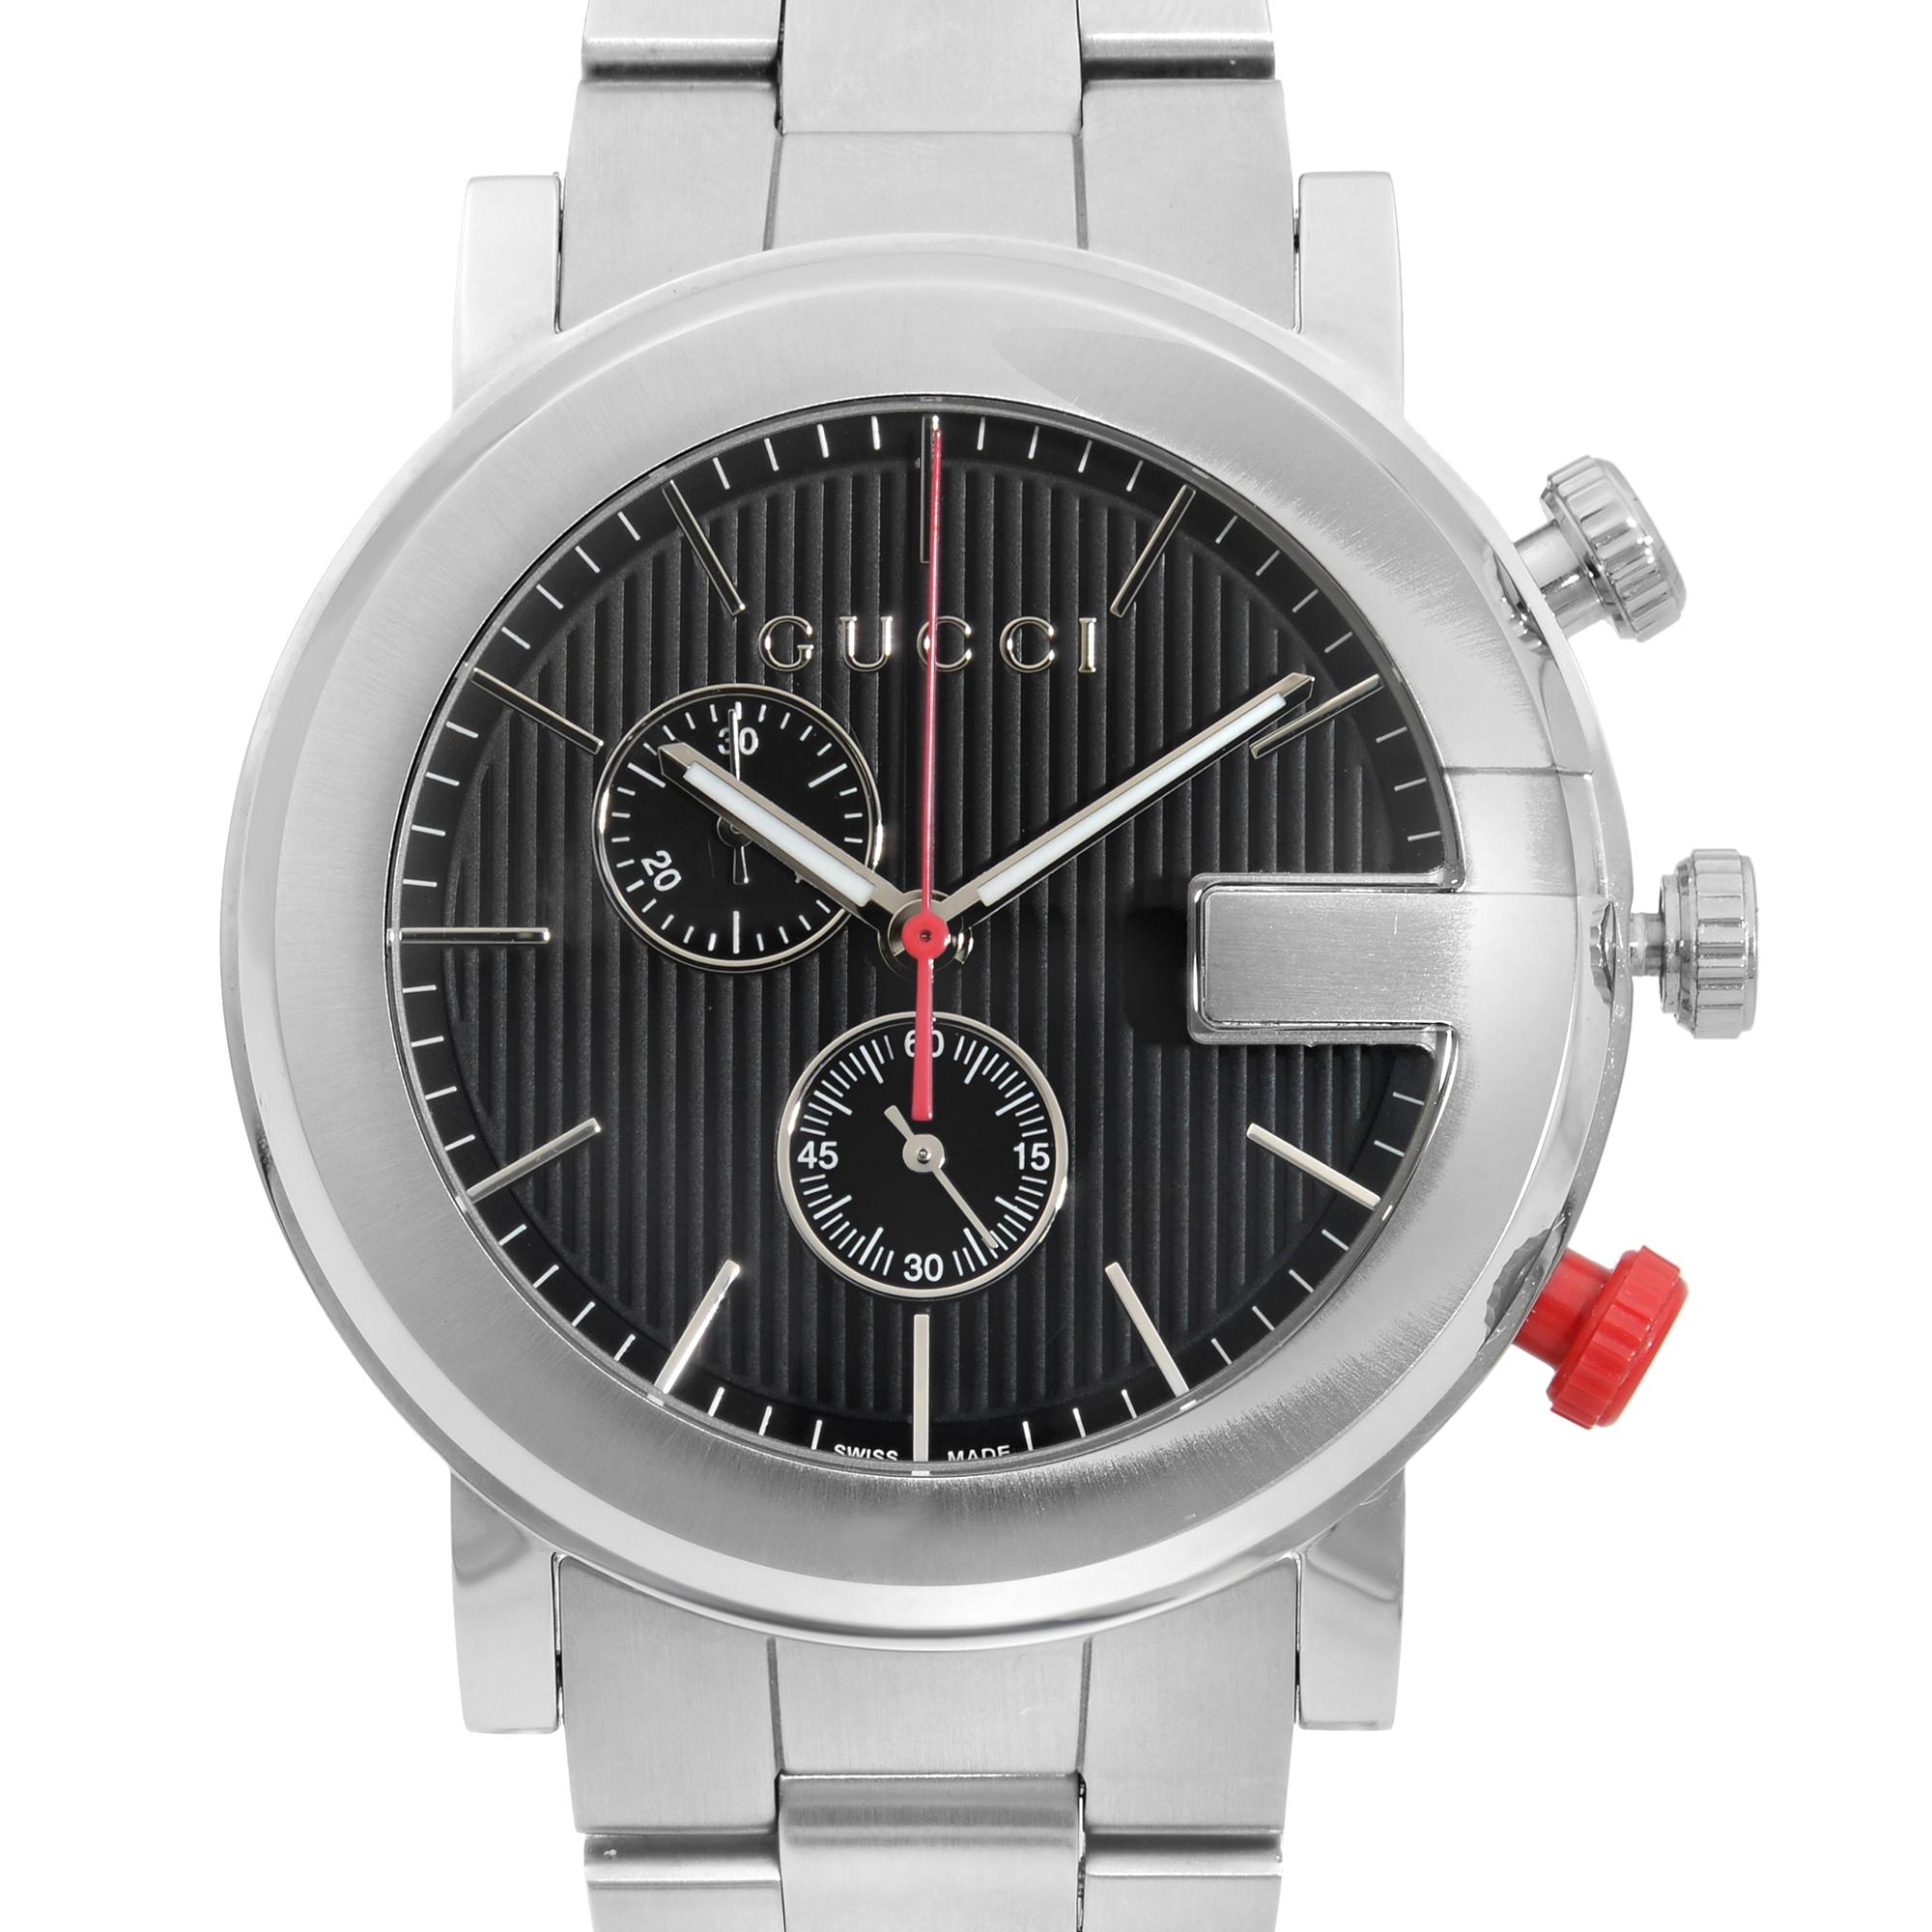 This display model Gucci G-Gucci YA101361  is a beautiful men's timepiece that is powered by quartz (battery) movement which is cased in a stainless steel case. It has a round shape face,  dial and has hand sticks style markers. It is completed with